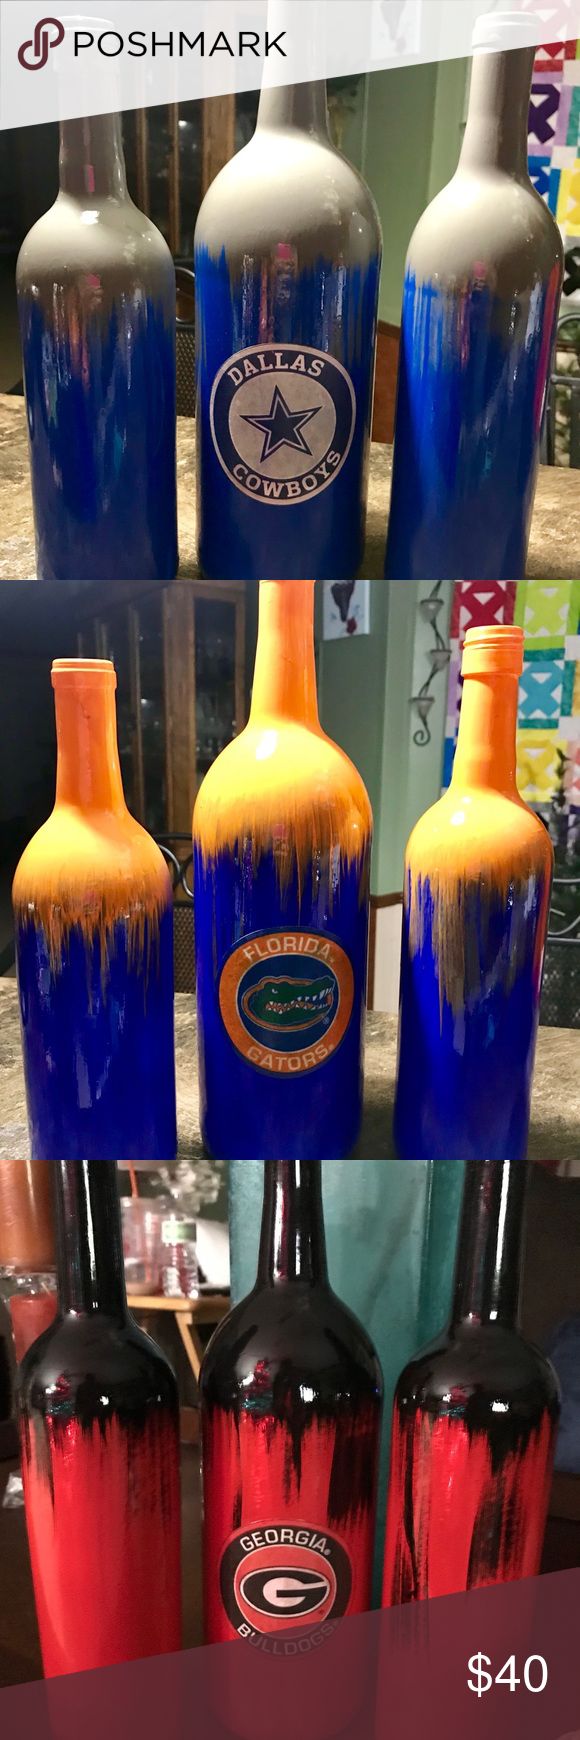 Painted TEAM wine bottles I paint any TEAM you want with any sport using wine bo...